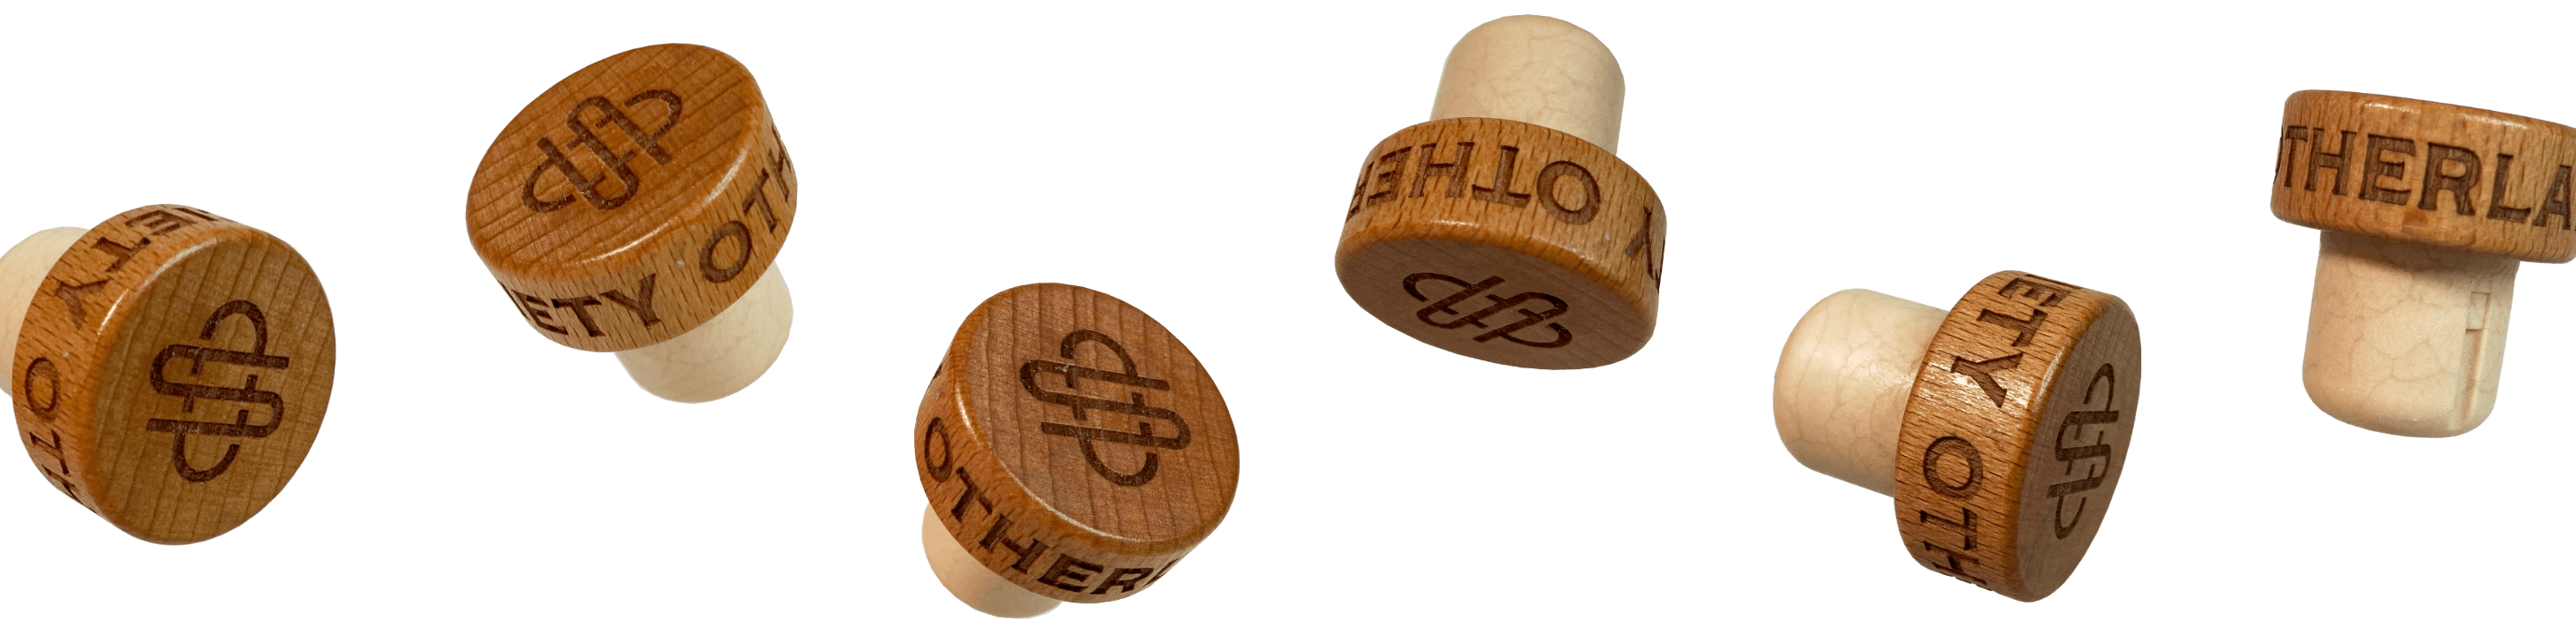 a row of floating wooden bottle caps with engraved Otherland society text and OS monogram logo